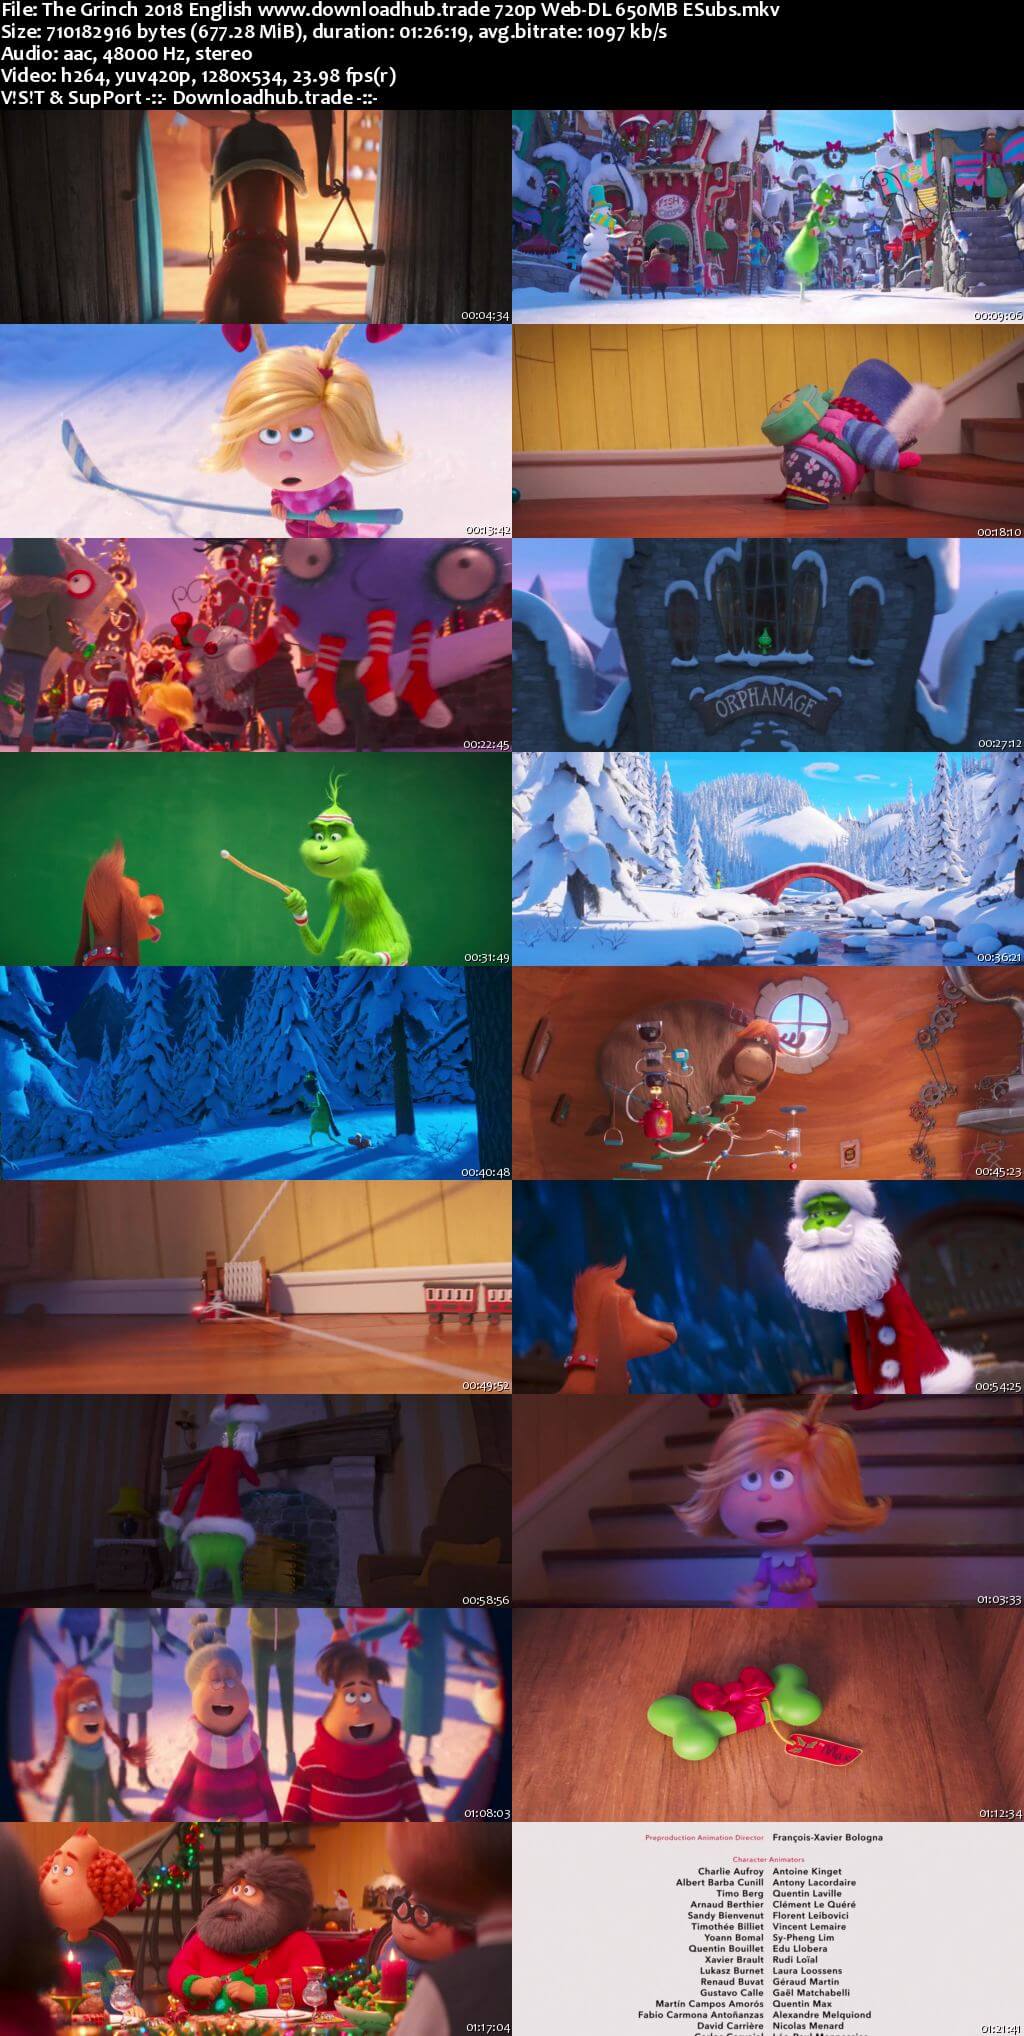 The Grinch 2018 English 720p Web-DL 650MB ESubs